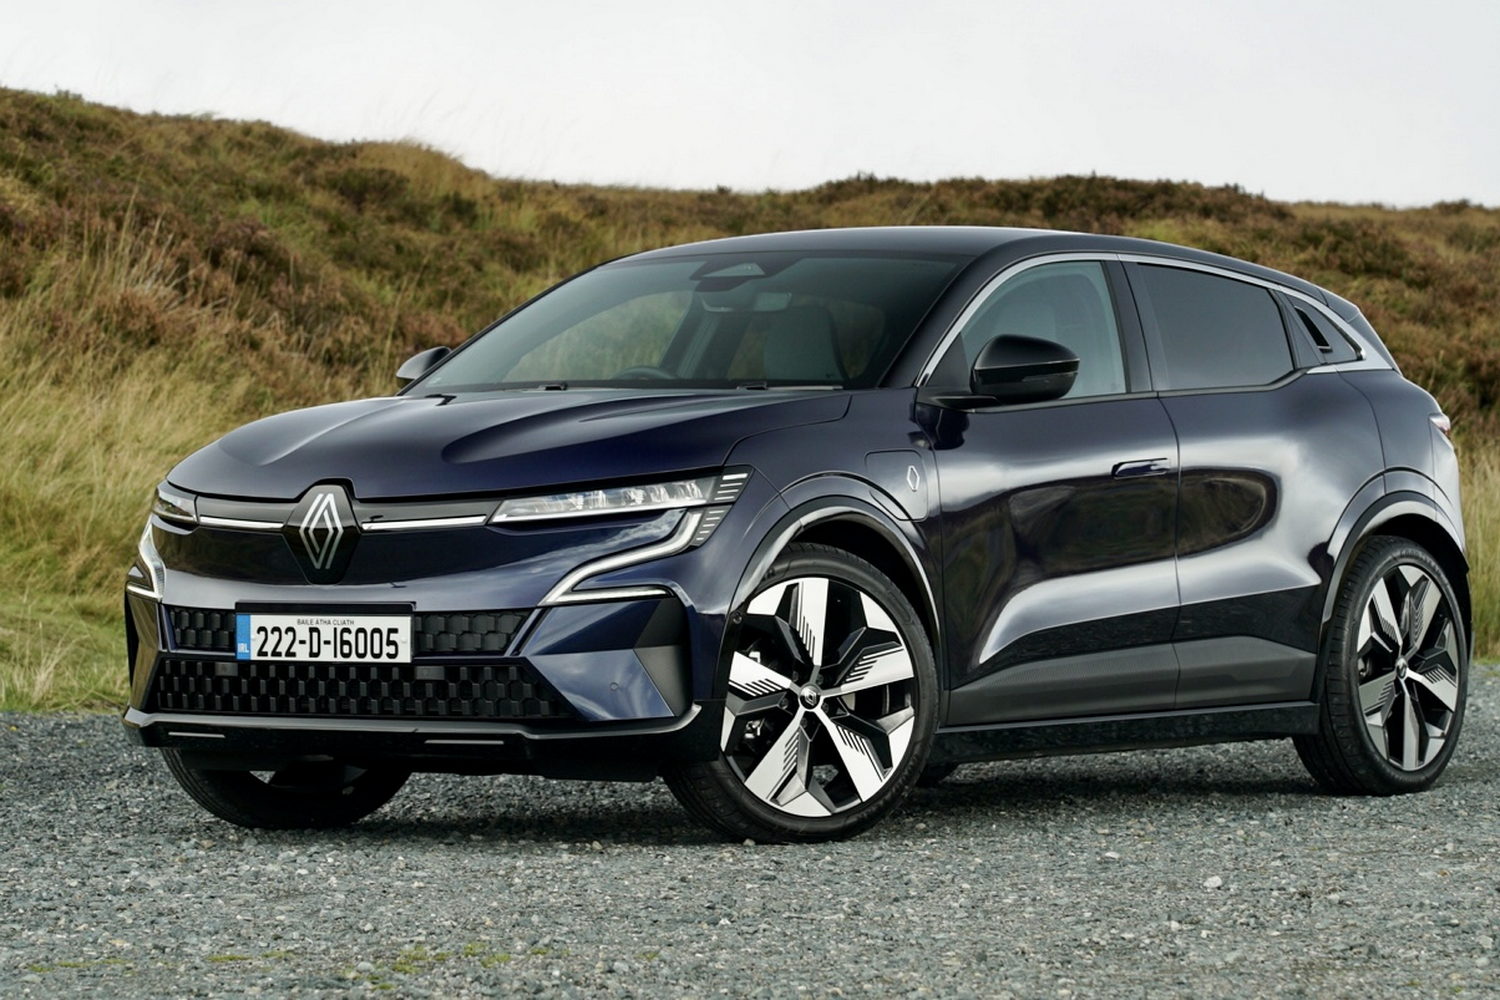 Electric Megane costs €37,495 in Ireland